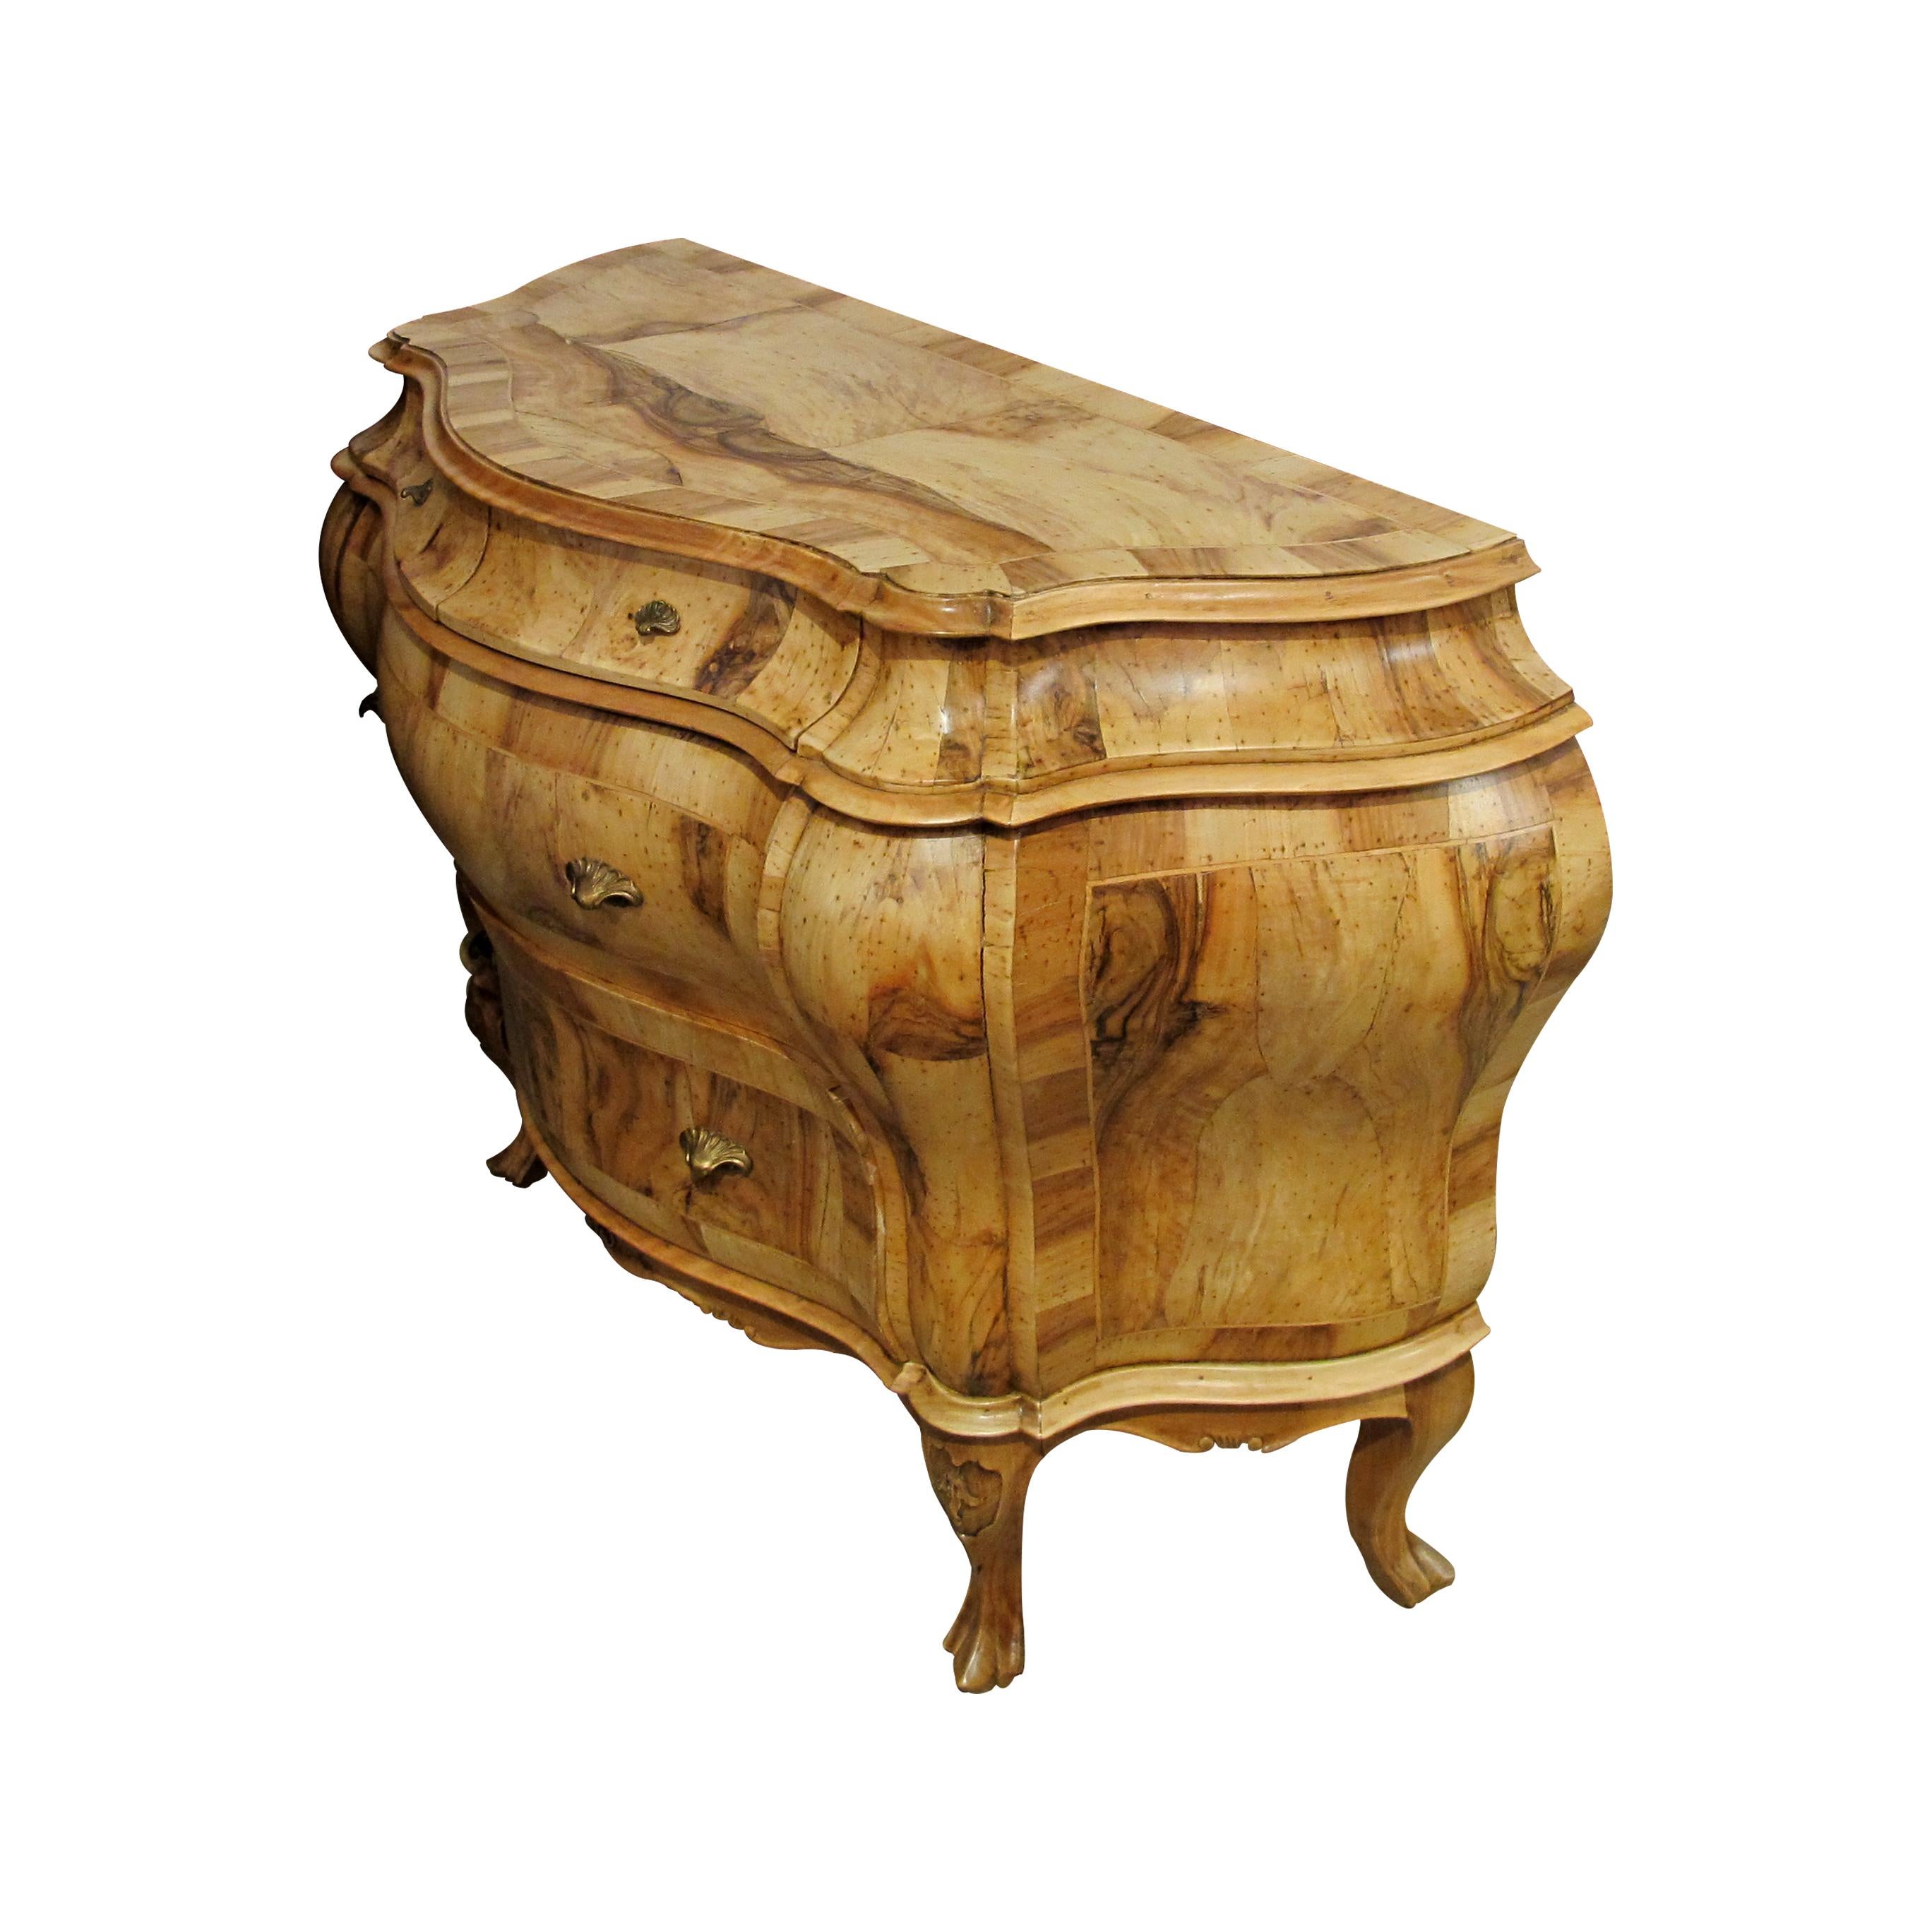 Marquetry 1930s Italian Large Bombé Chest of Drawers, Burl Olive Wood & Burl Walnut Marque